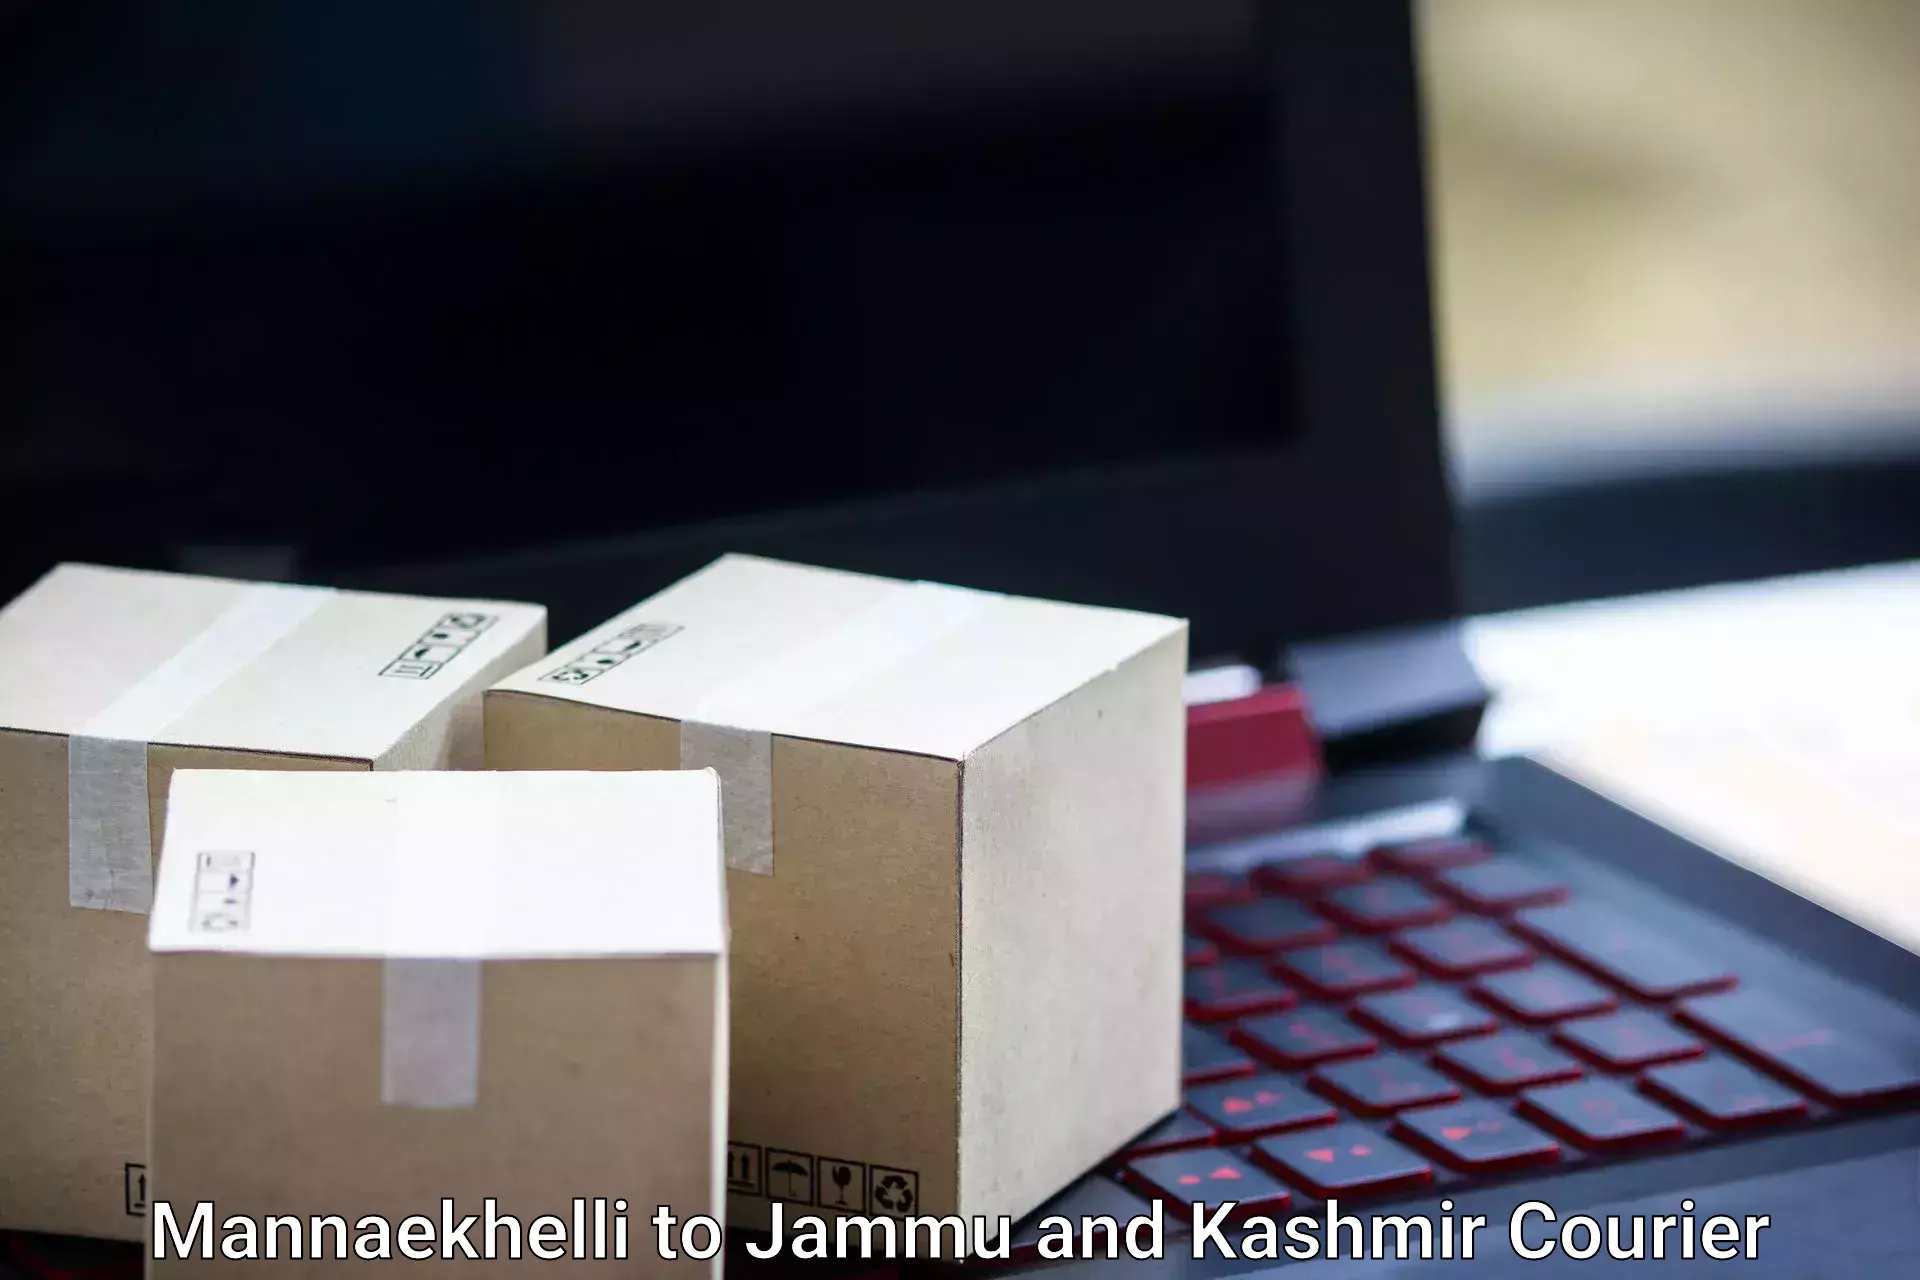 Instant baggage transport quote Mannaekhelli to Jammu and Kashmir